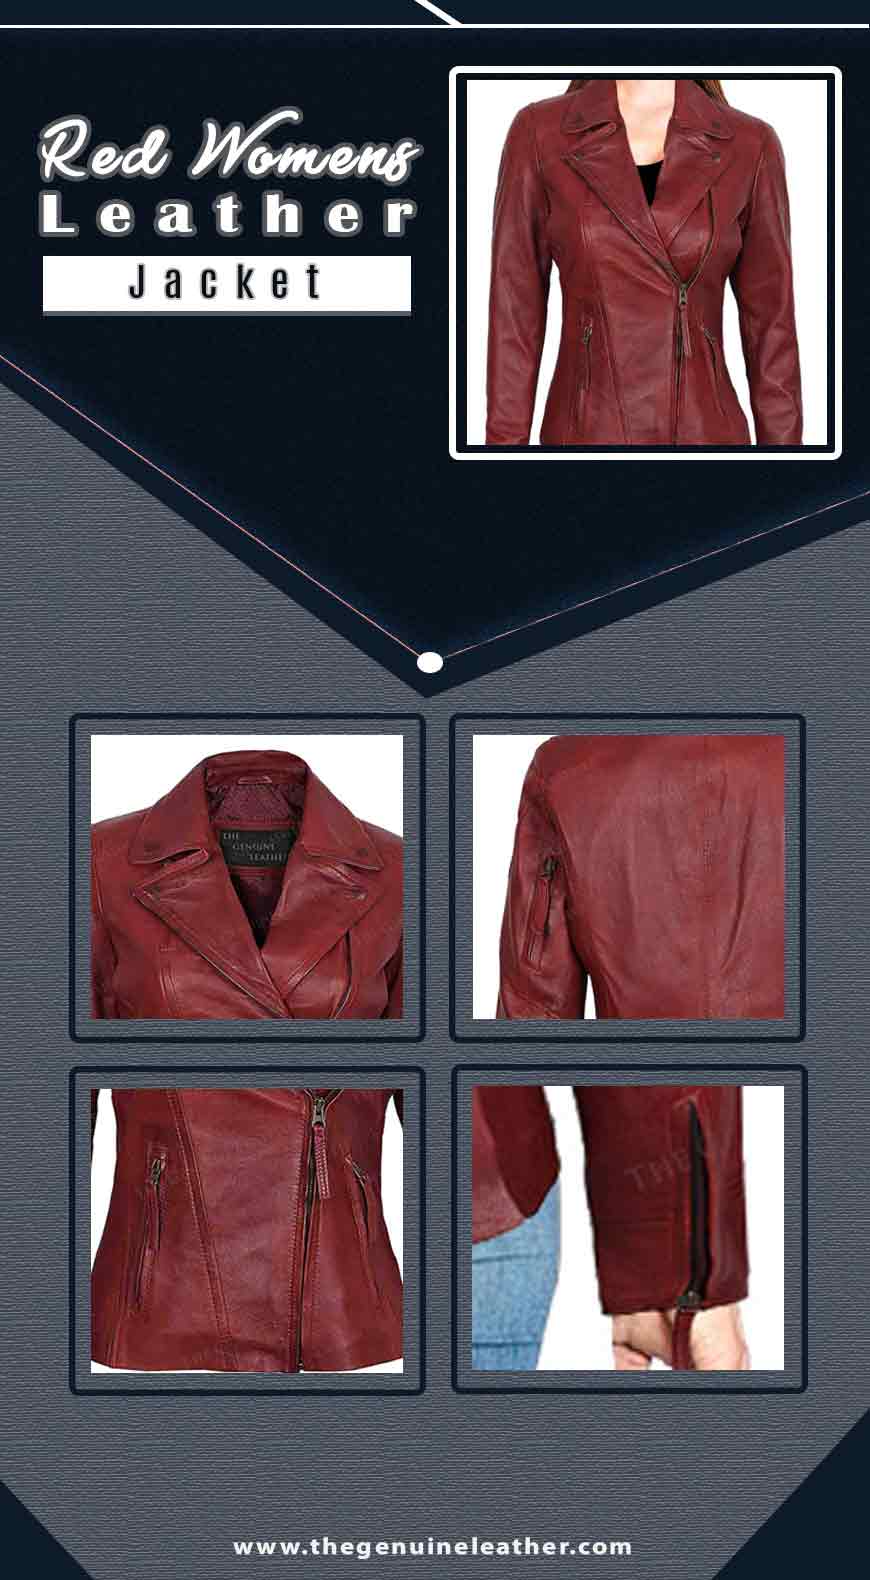 Red Womens Leather Jacket Infographic